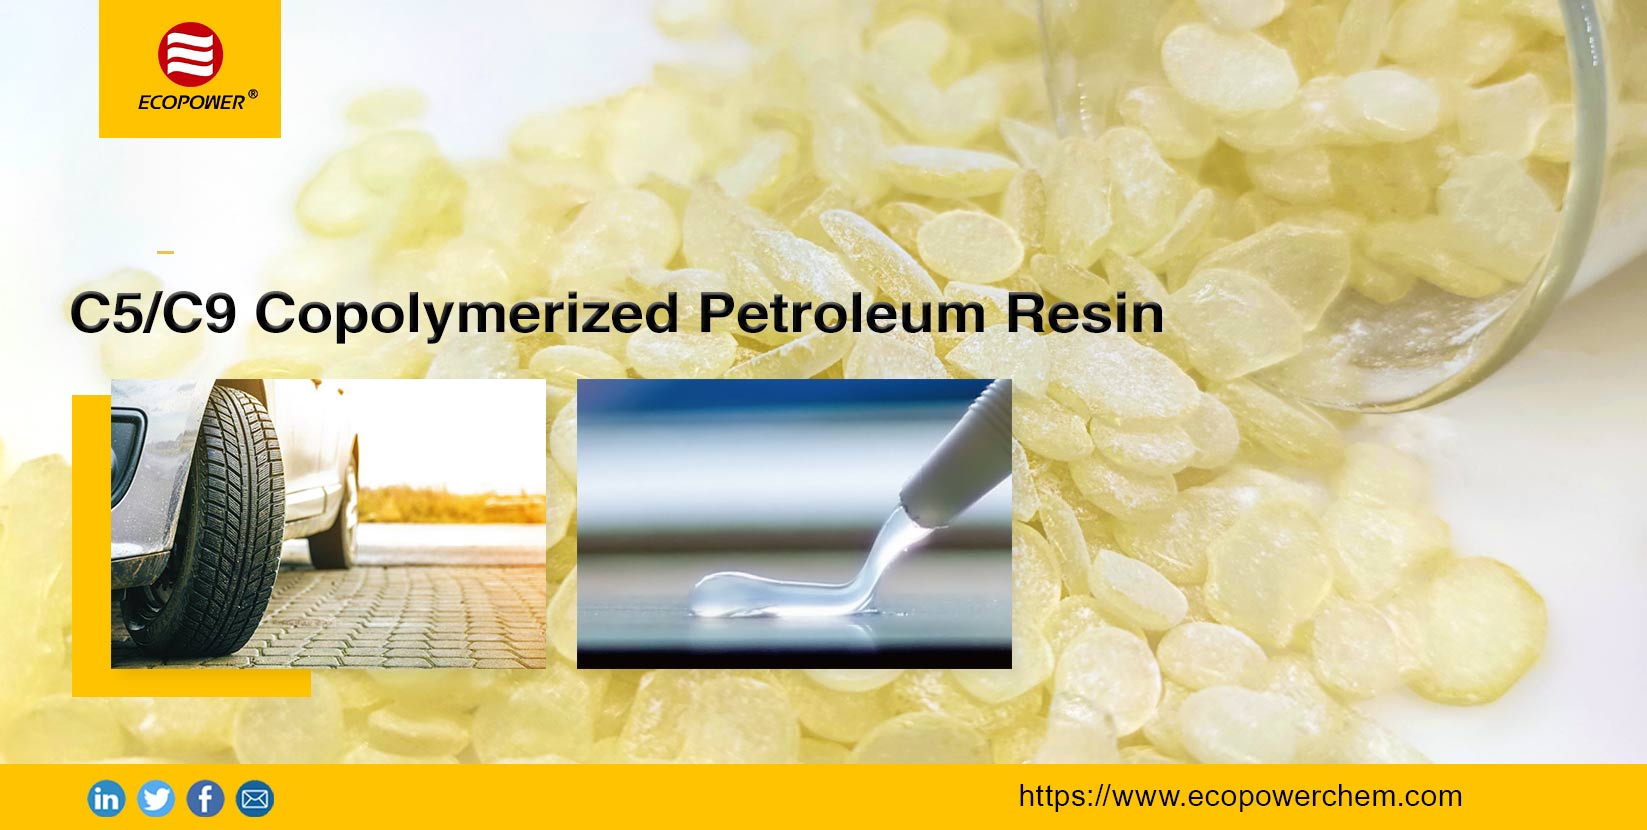 C5/C9 Copolymerized Petroleum Resin in Rubber and Adhesives